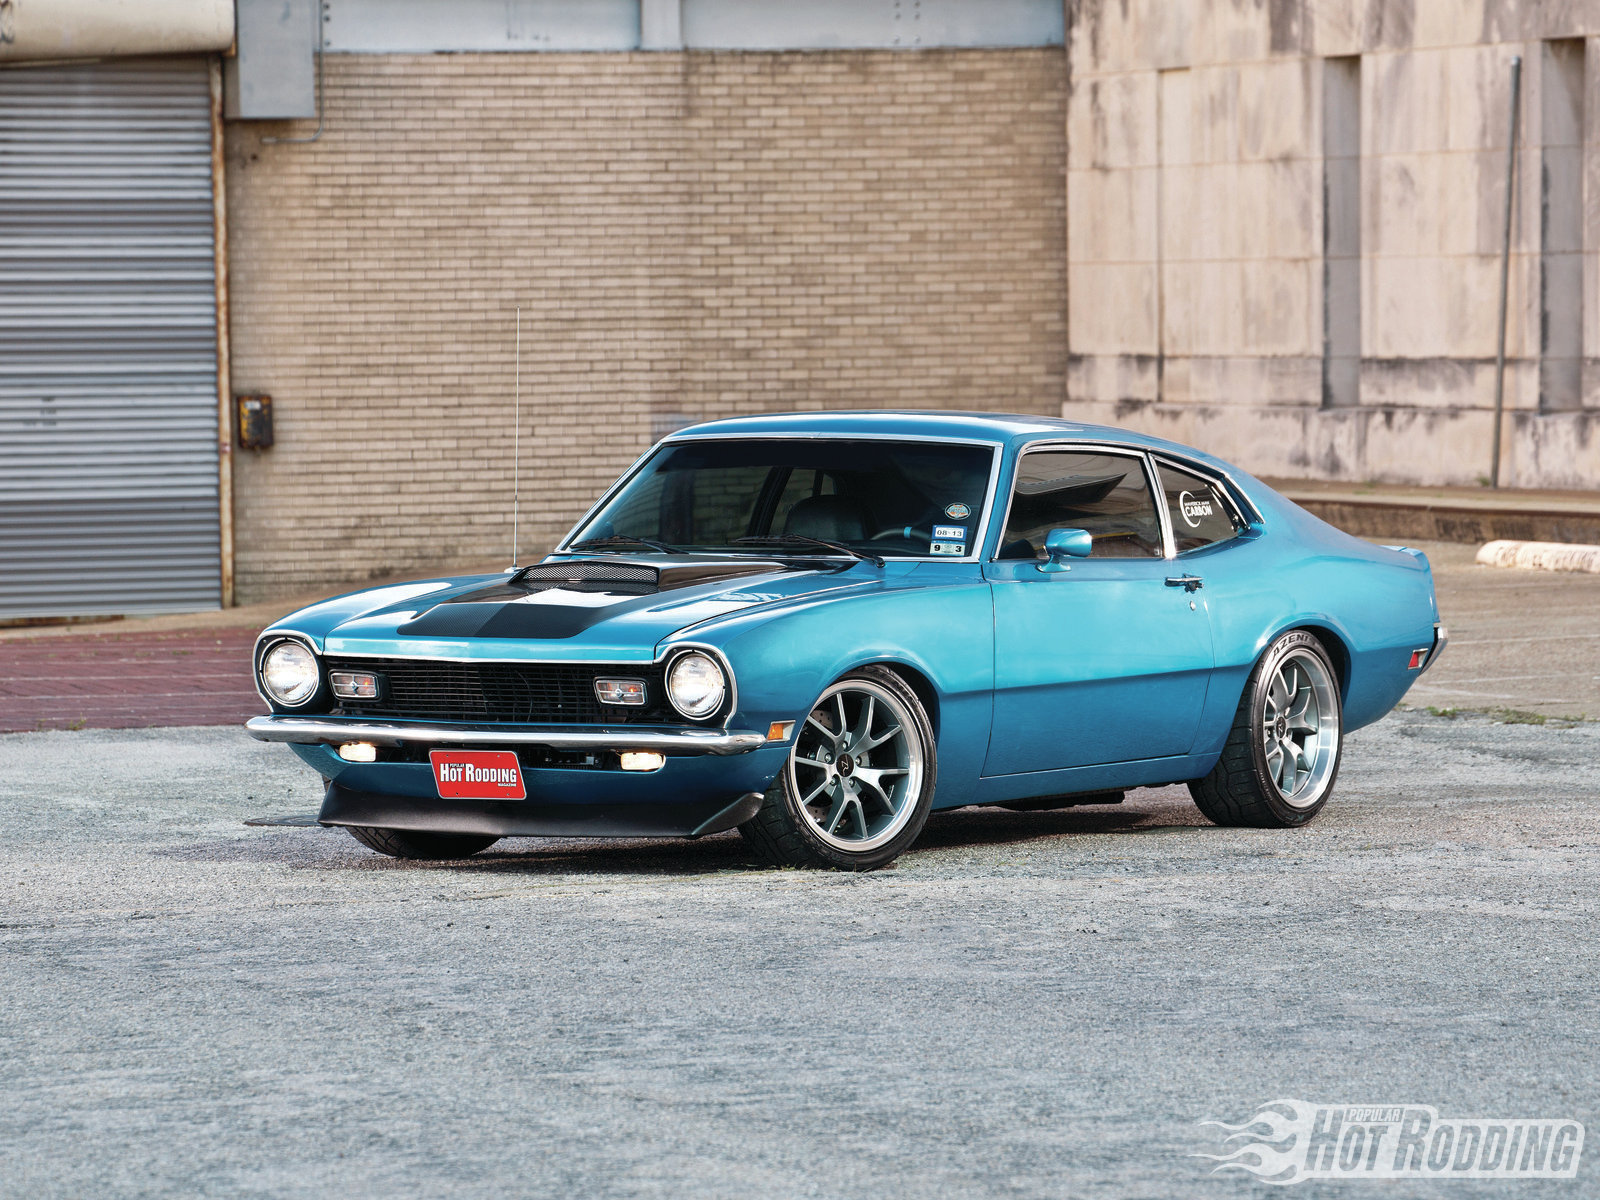 FORD MAVERICK muscle classic hot rod rods gs wallpaper 1600x1200